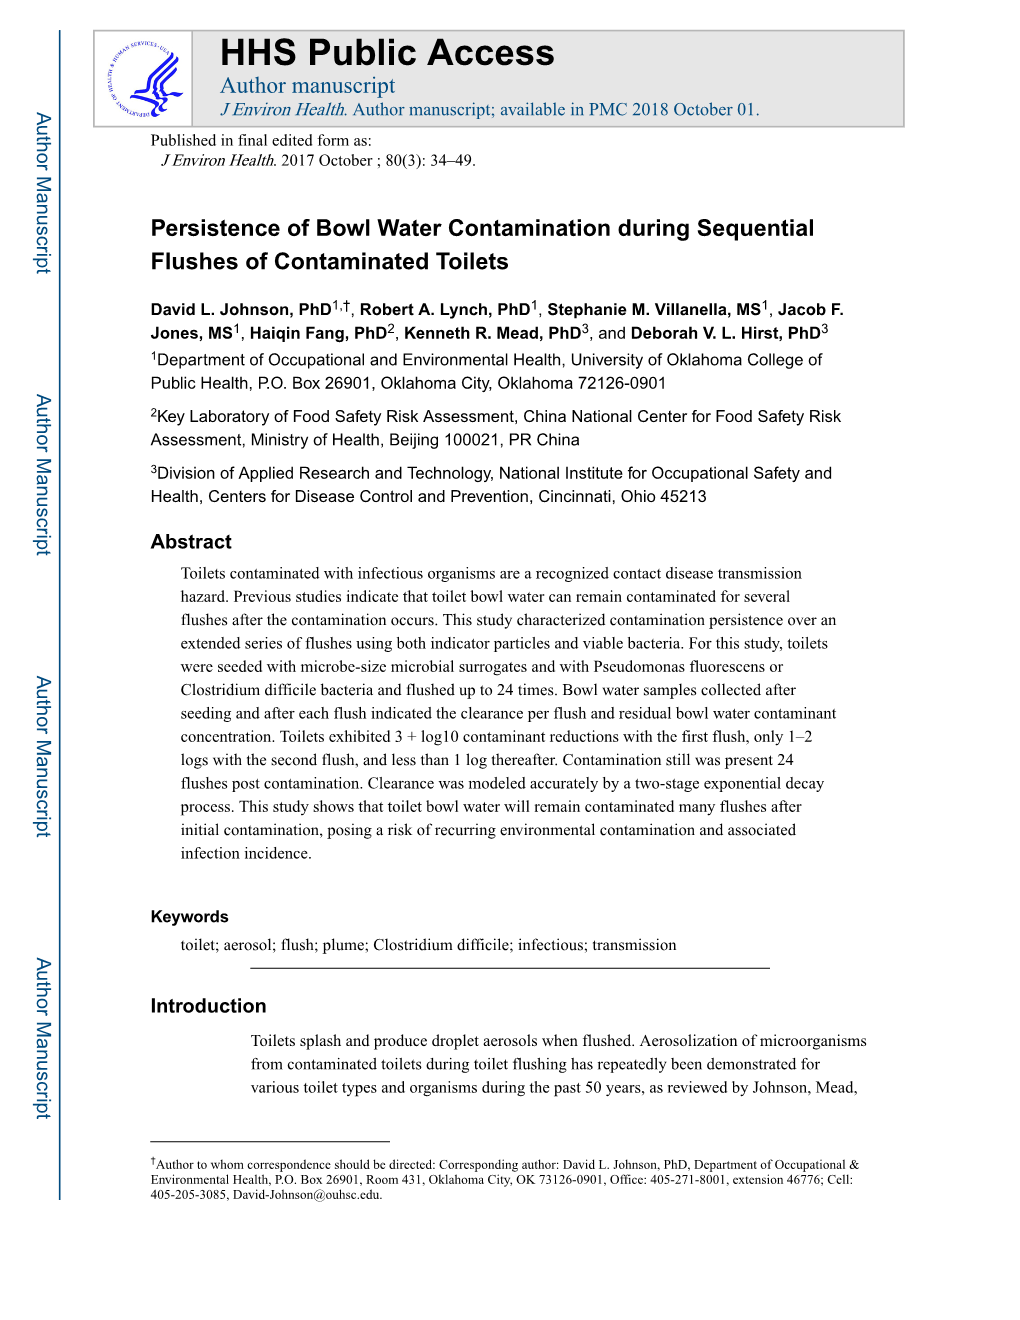 Persistence of Bowl Water Contamination During Sequential Flushes of Contaminated Toilets